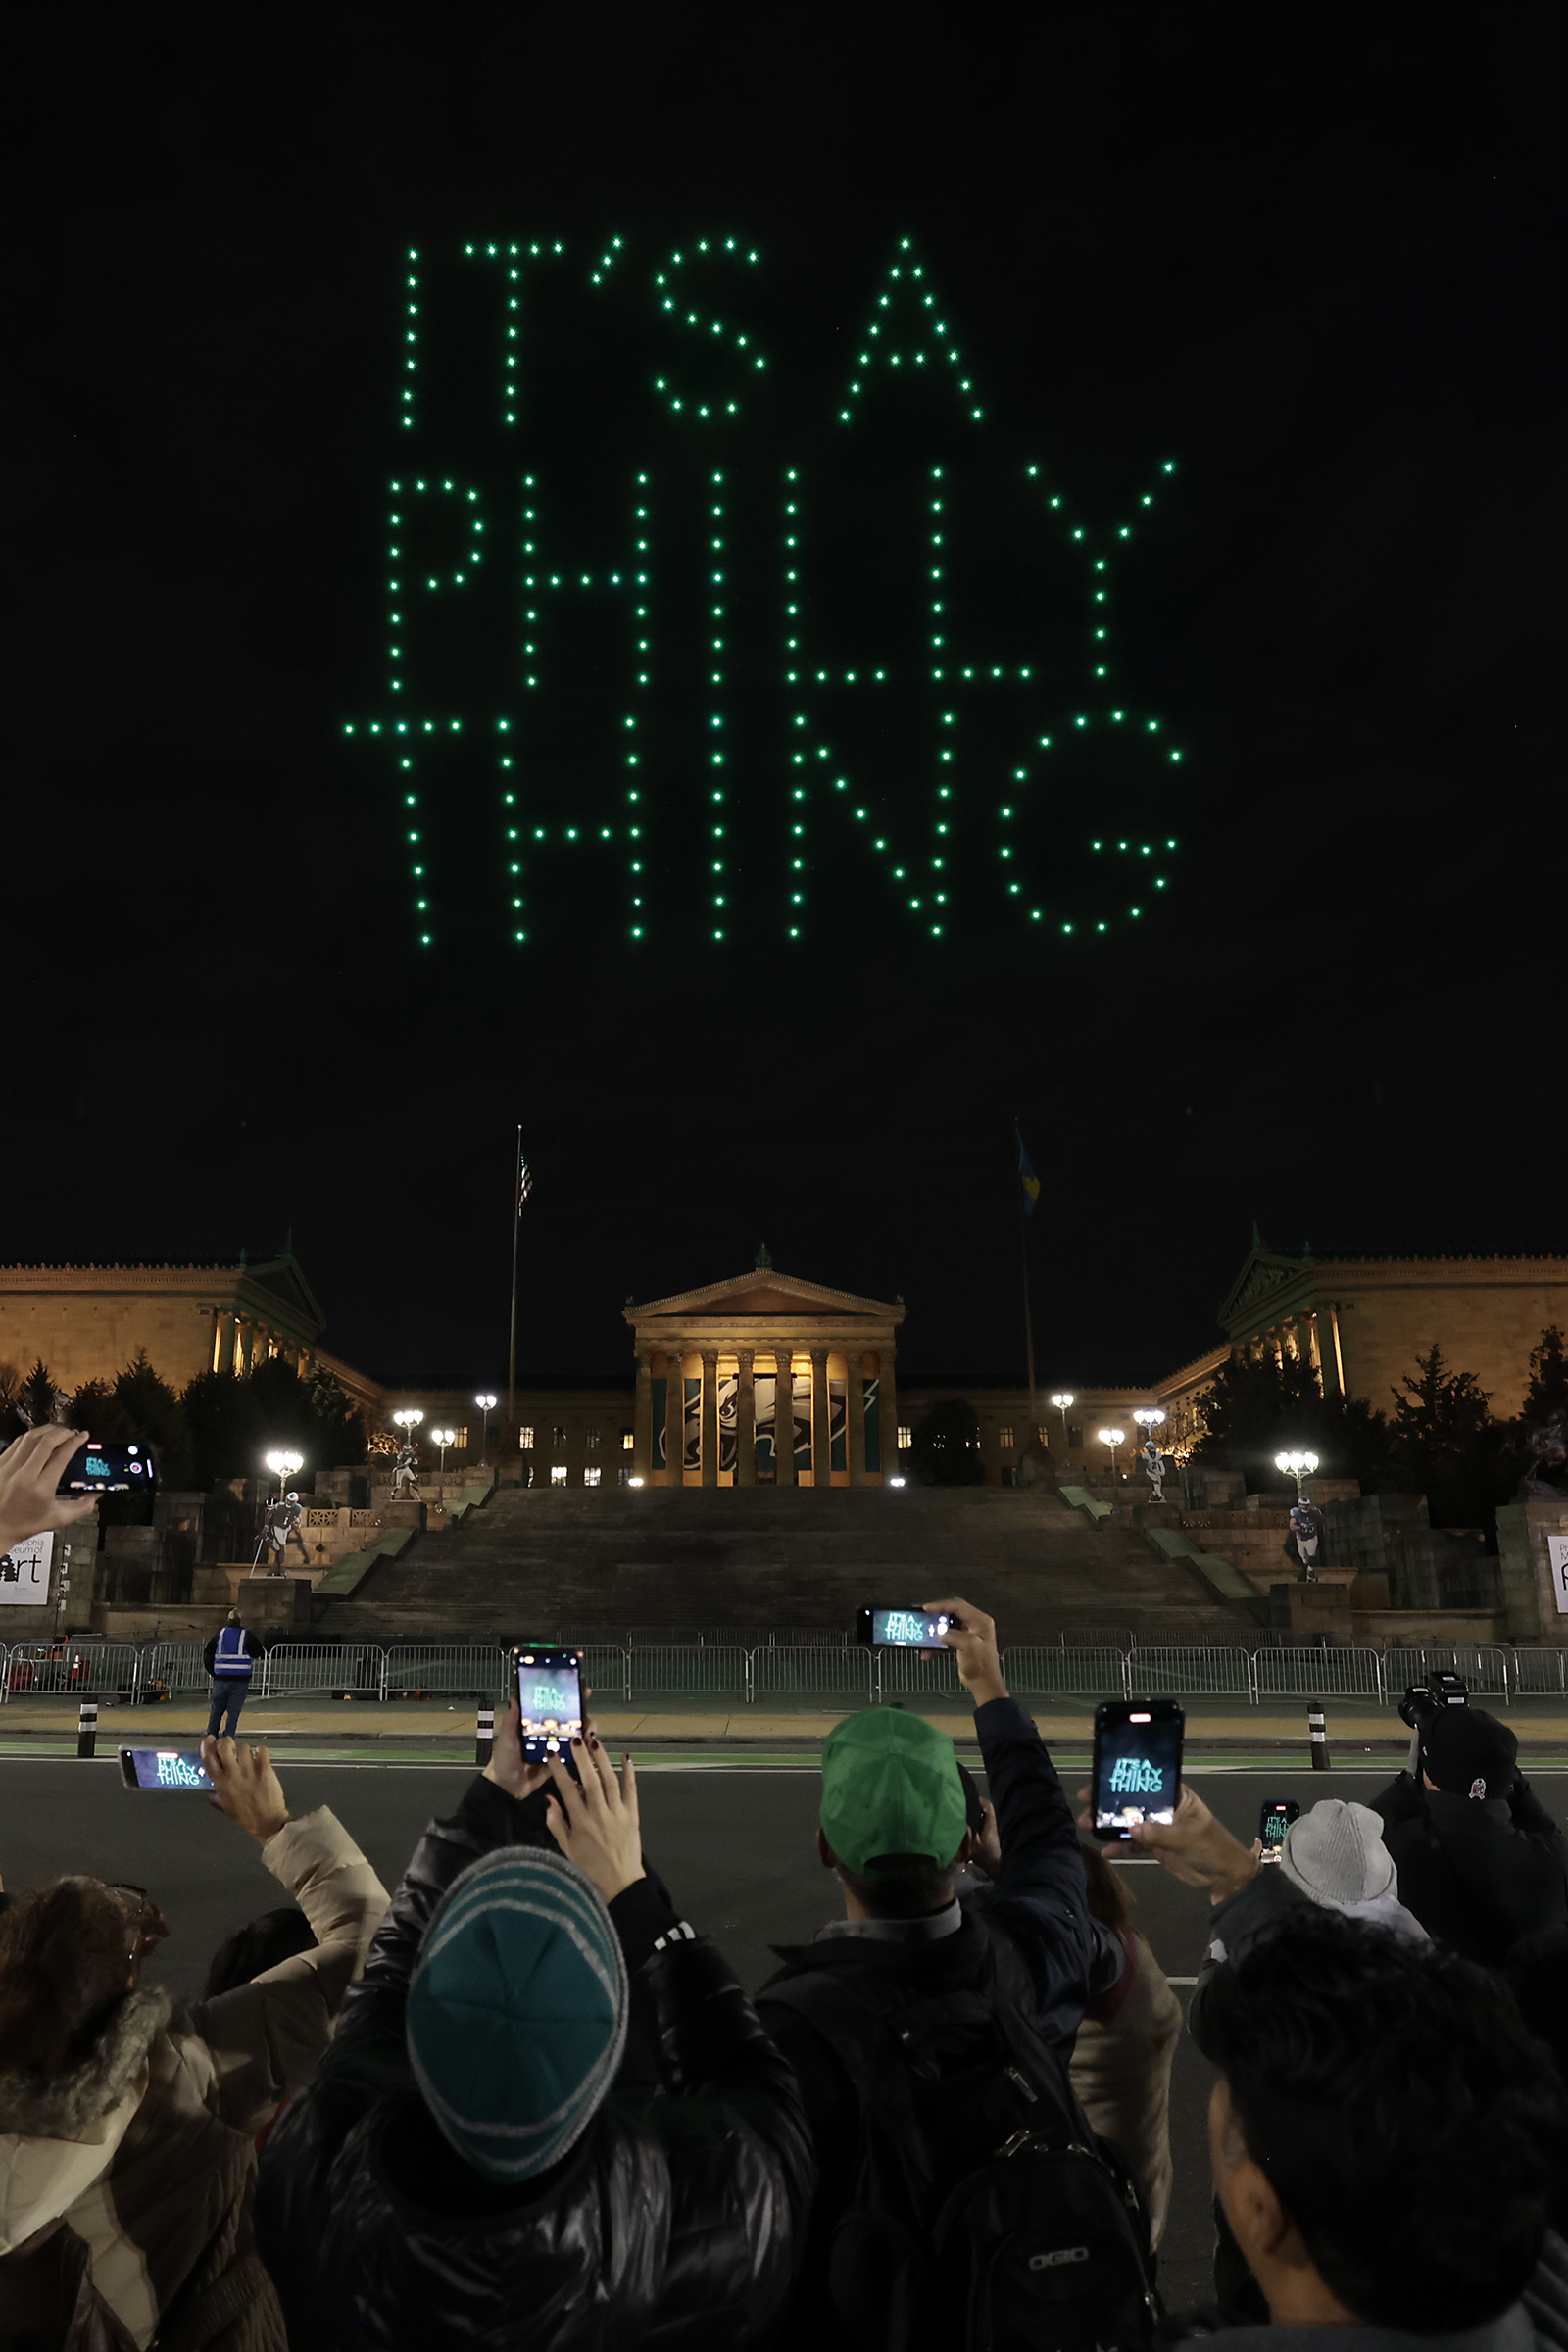 Philadelphia Eagles - It's a Philly thing. #FlyEaglesFly